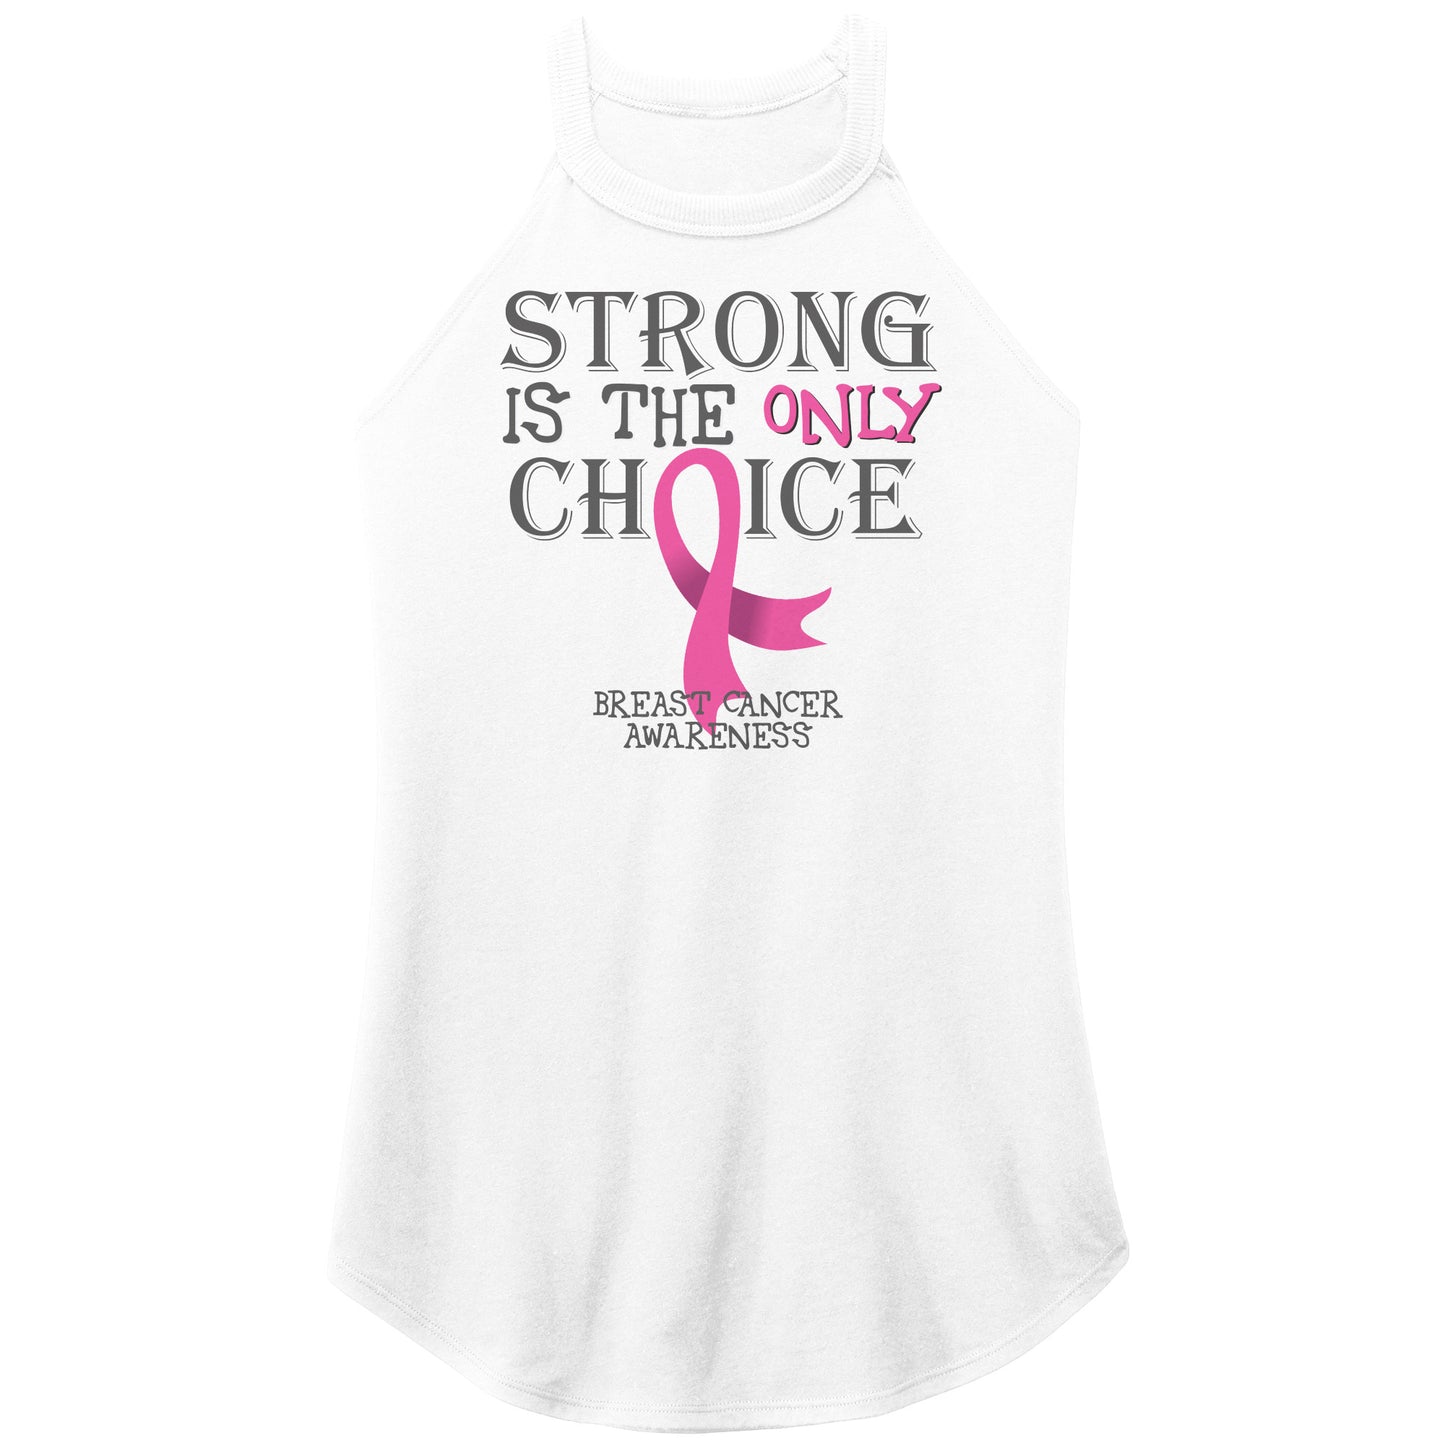 Strong is the Only Choice -Breast Cancer Awareness T-Shirt, Hoodie, Tank